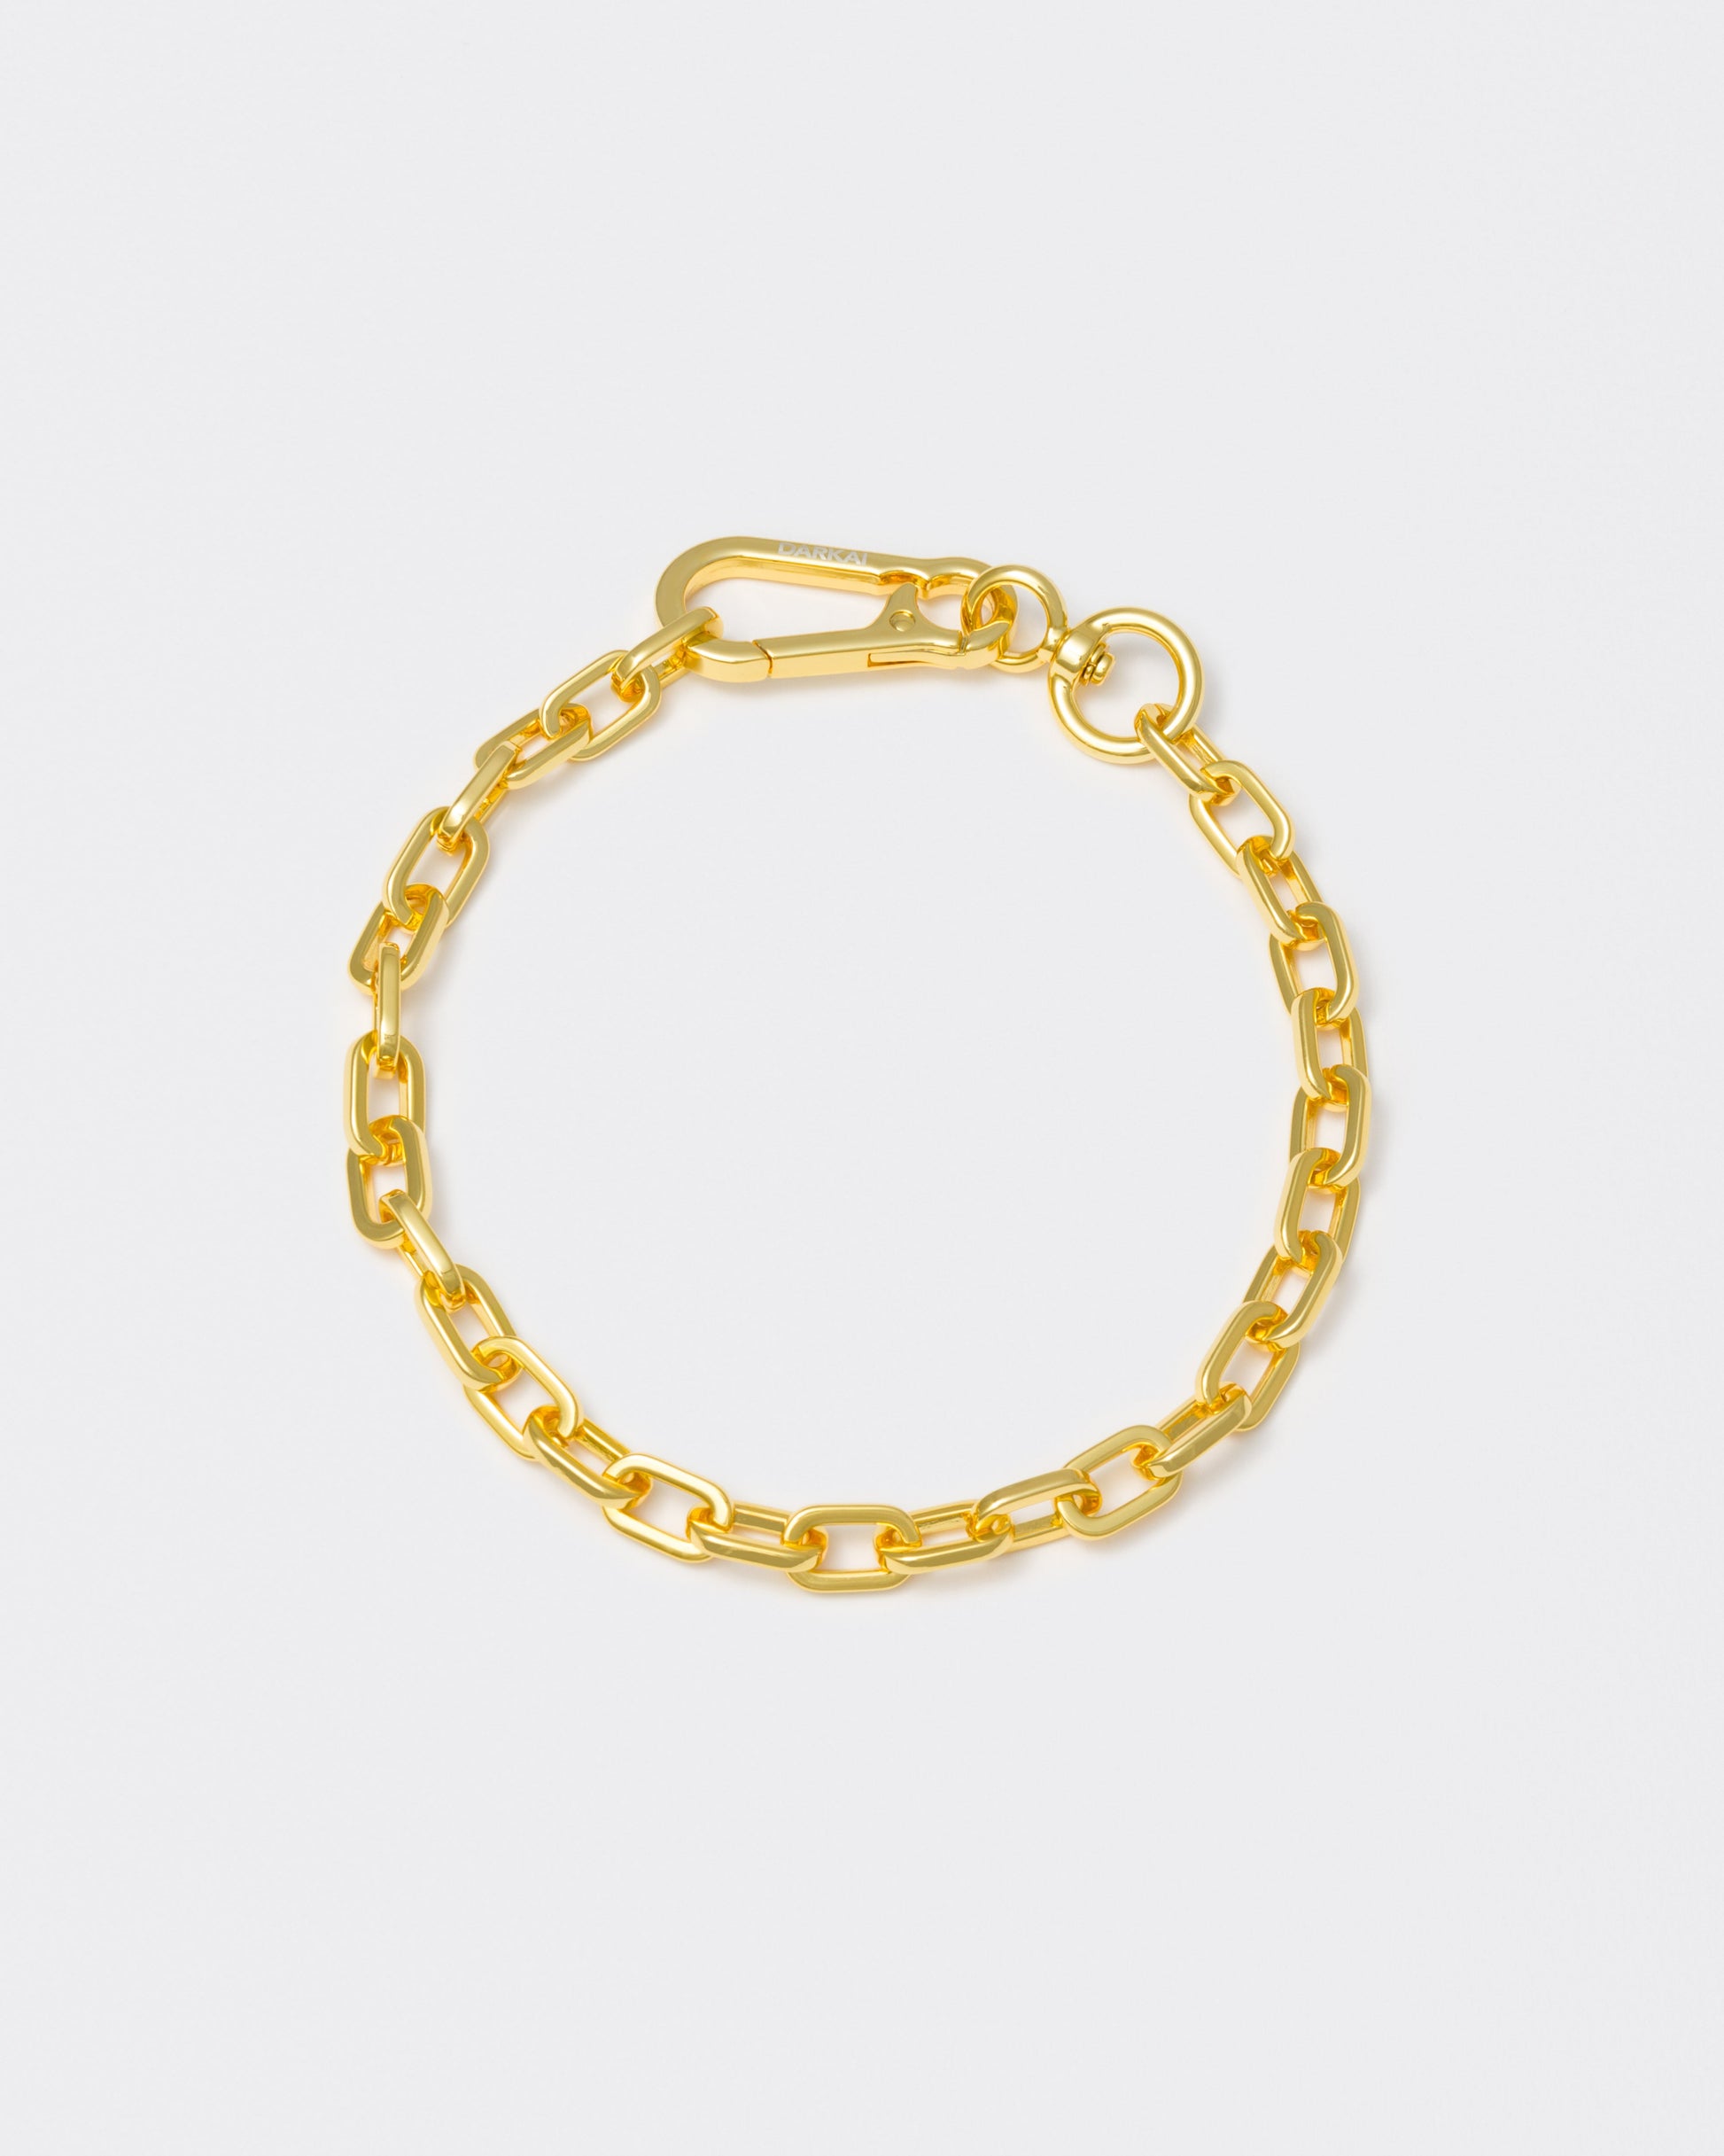 18k yellow gold coated rolo chain choker with lasered logo oversize carabiner clasp.